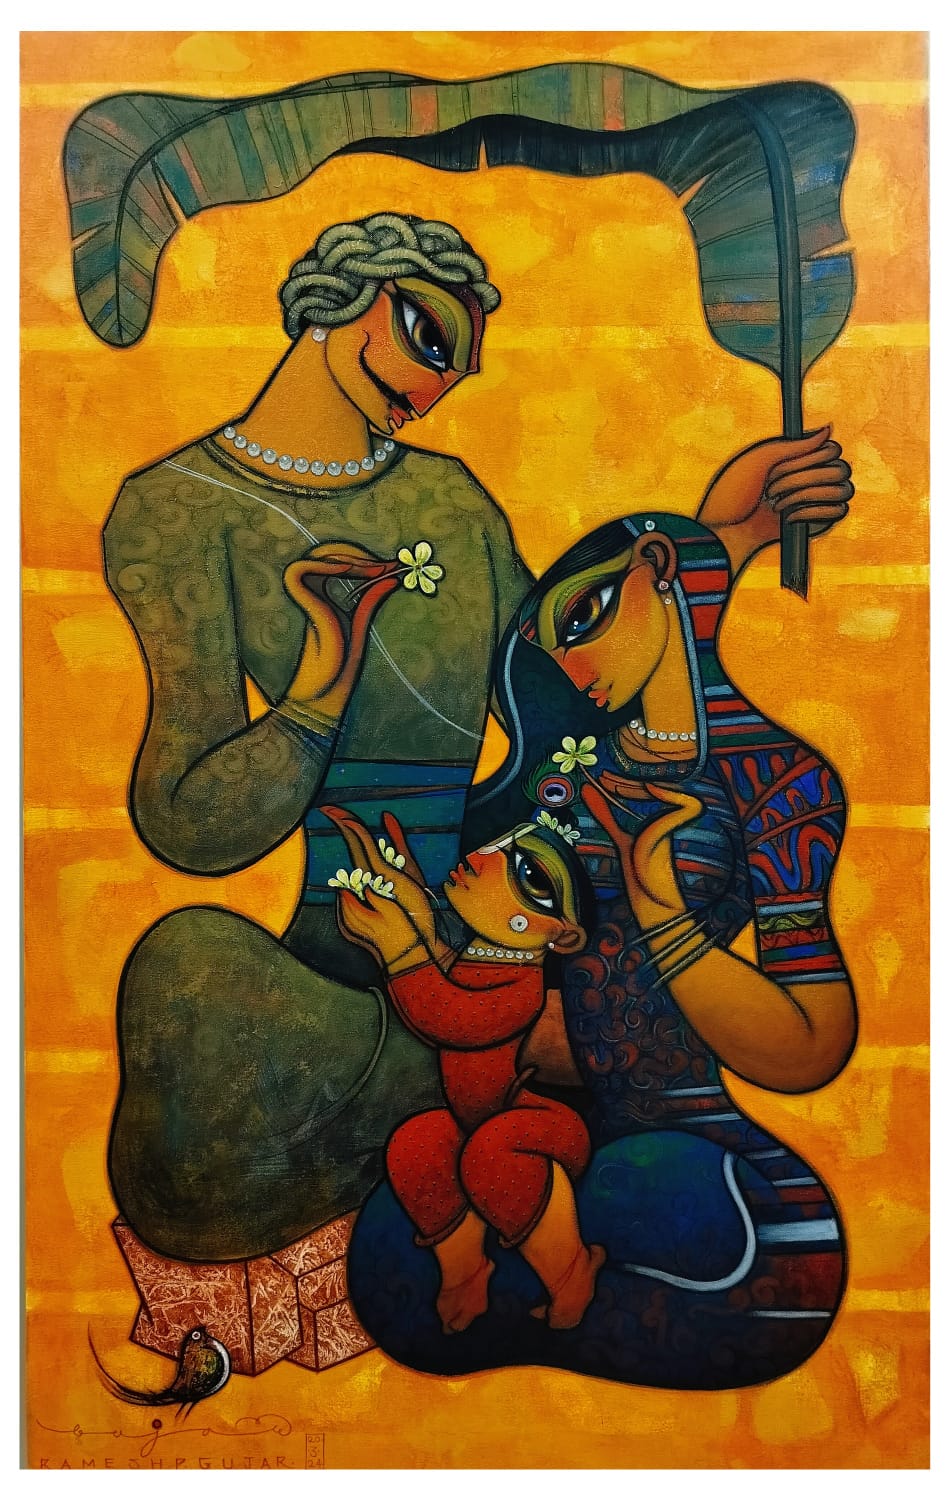 Figurative Painting with Acrylic on Canvas "Family" art by Ramesh P Gujar